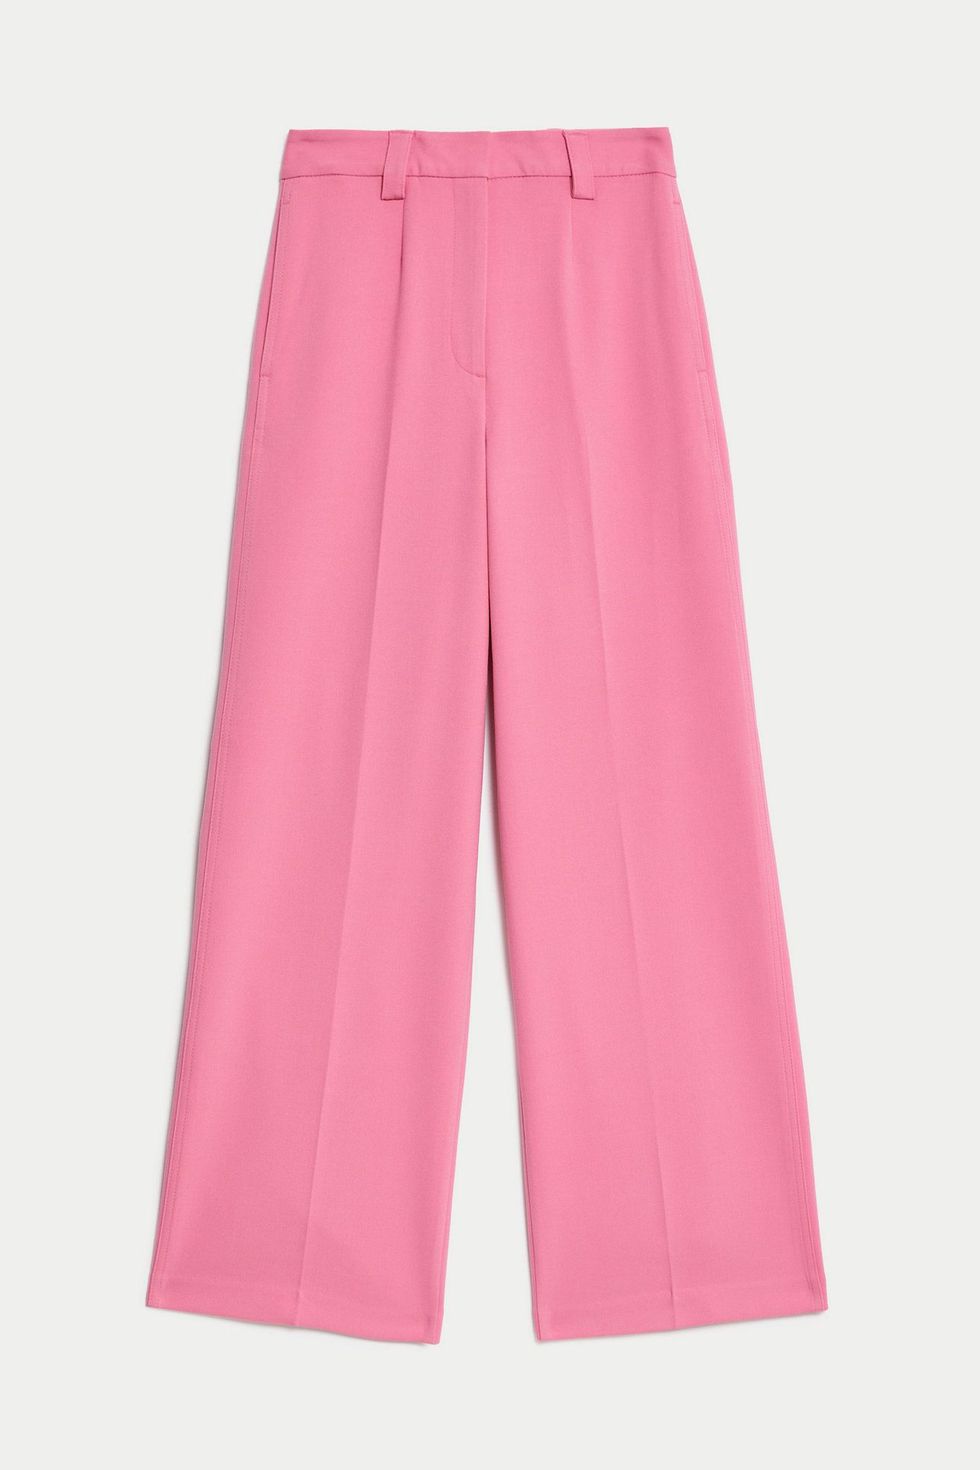 Best statement M&S trousers for summer